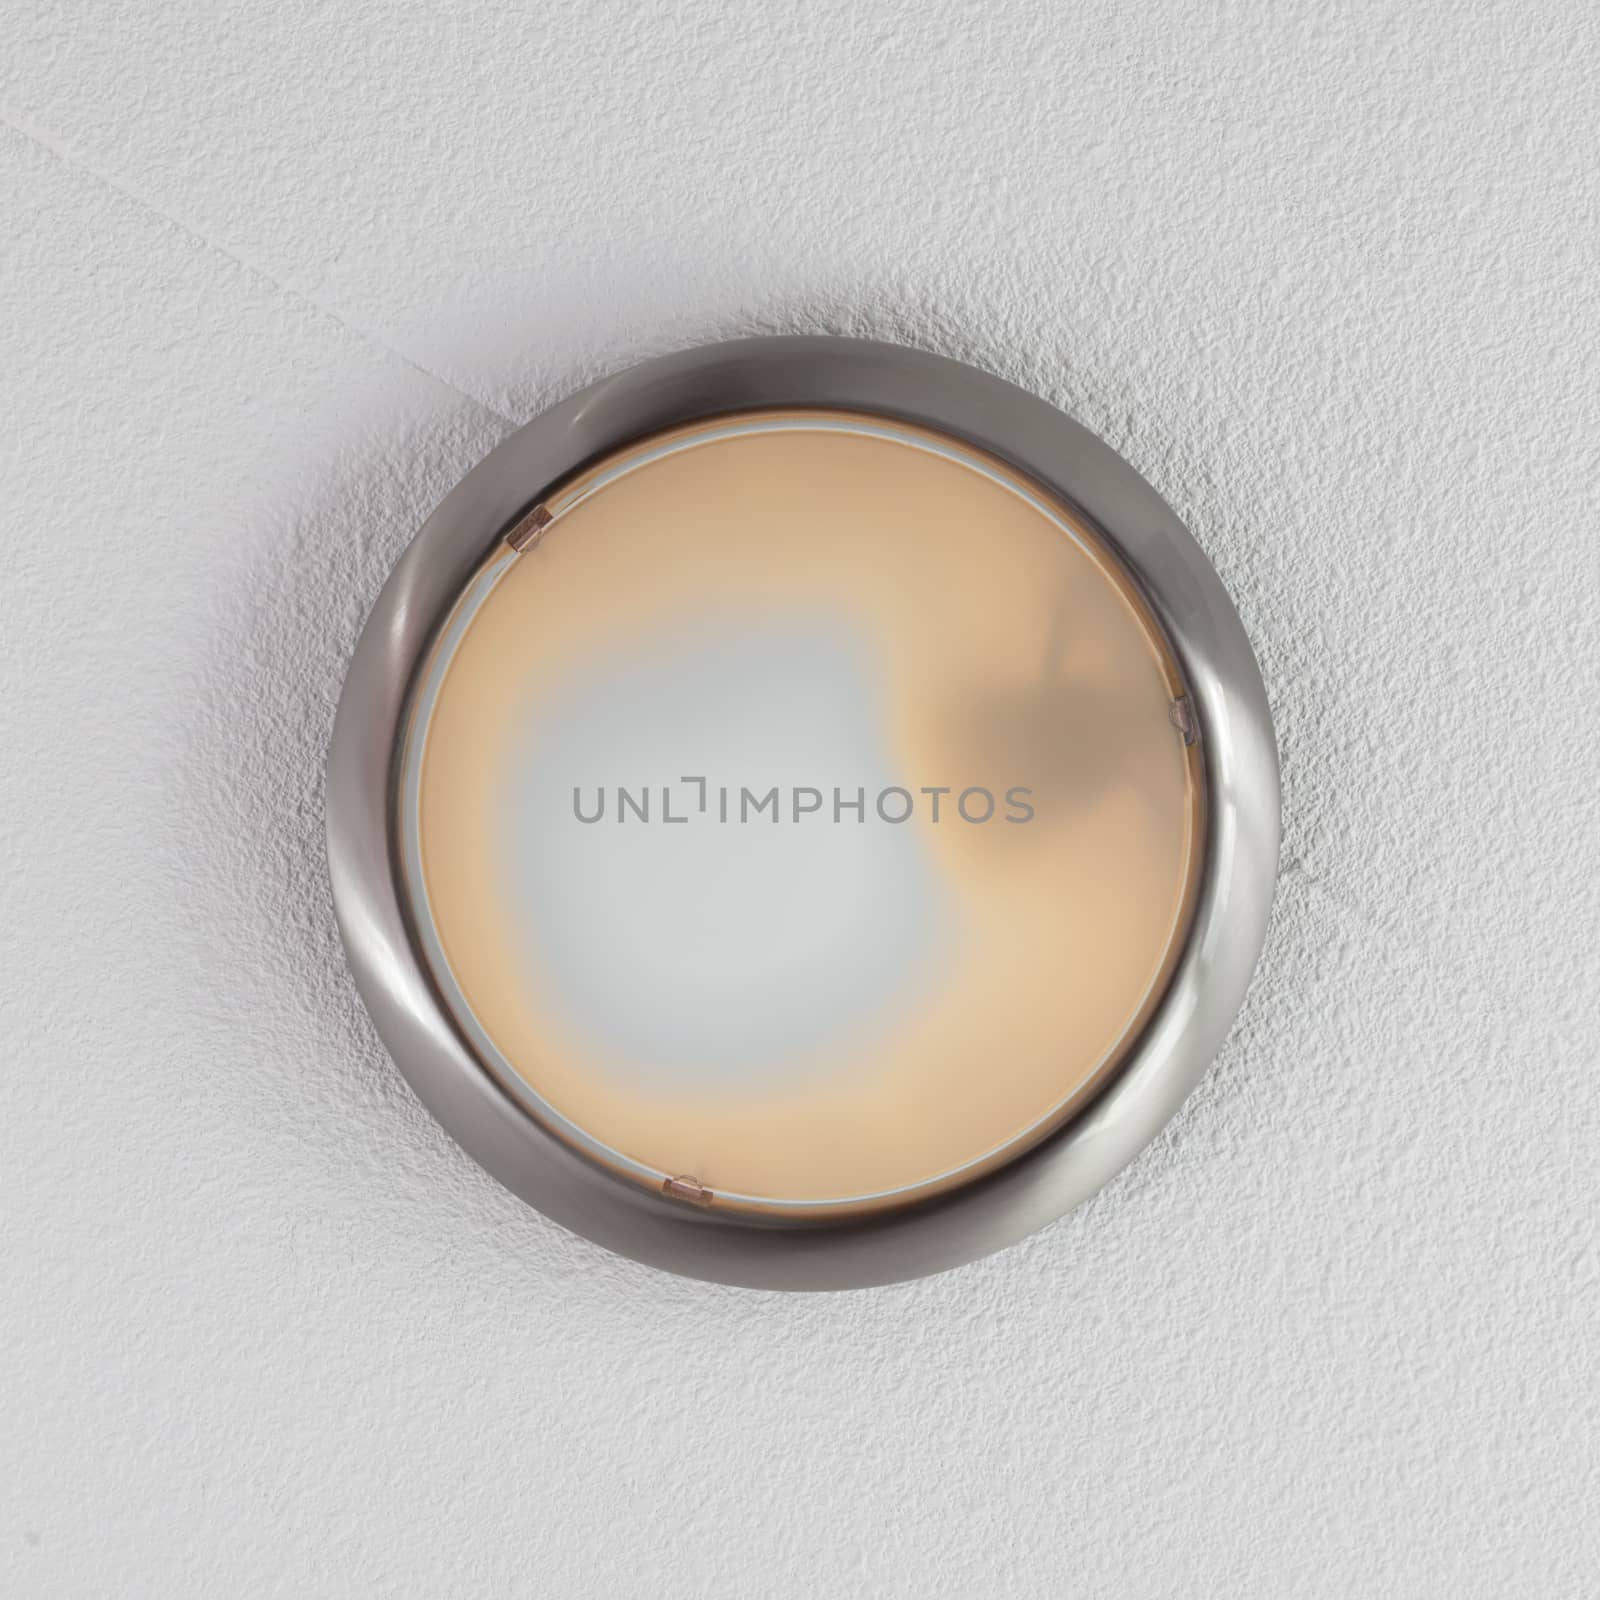 Down-light ceiling, home interior by michaklootwijk